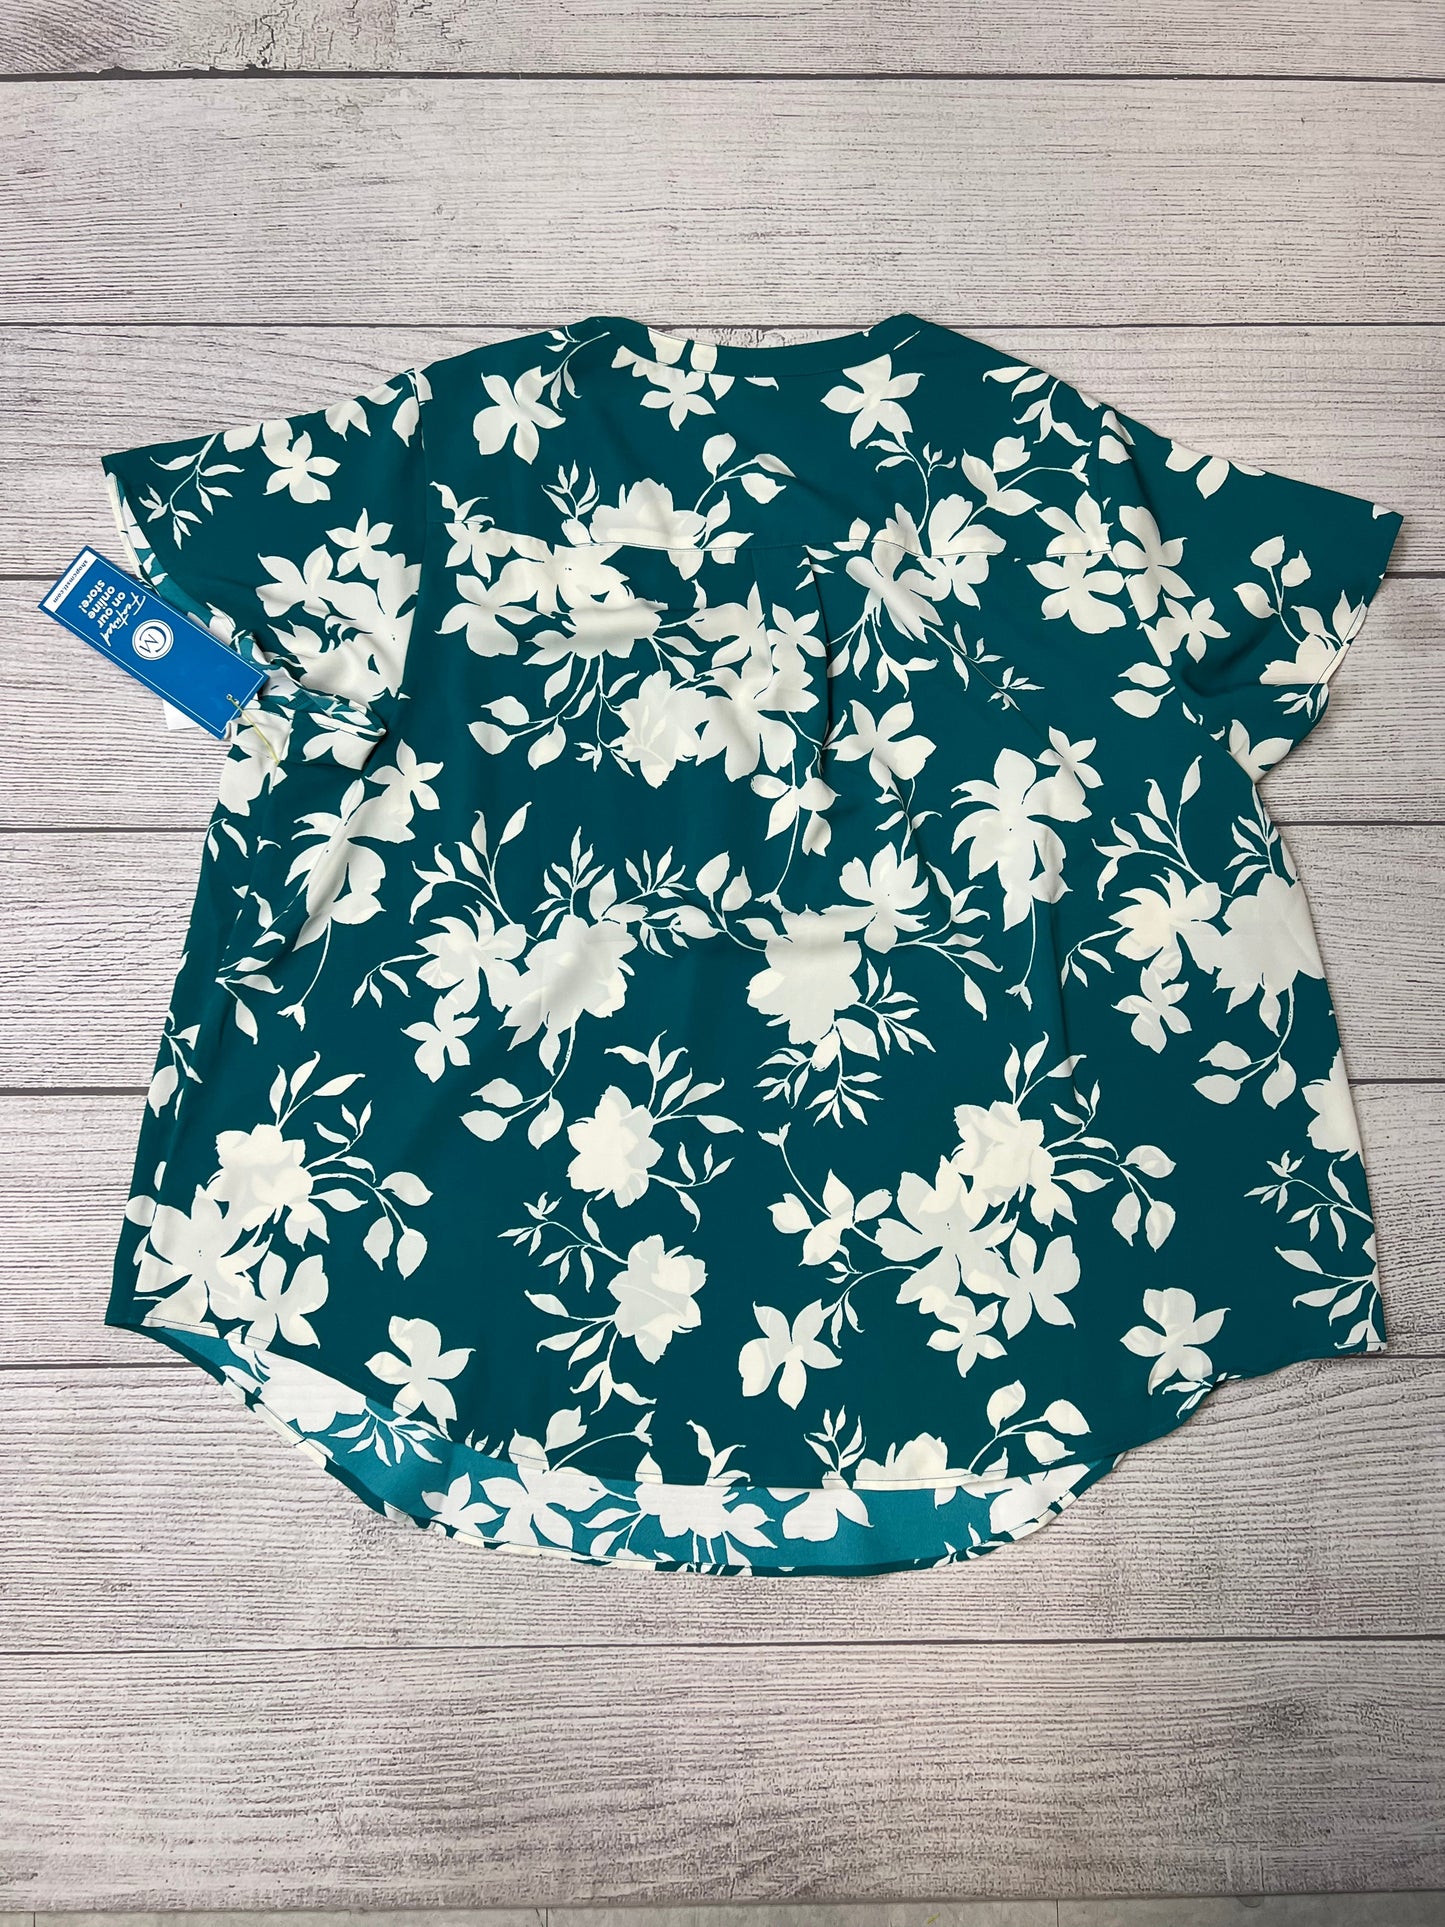 Turquoise Top Short Sleeve Torrid, Size 3x